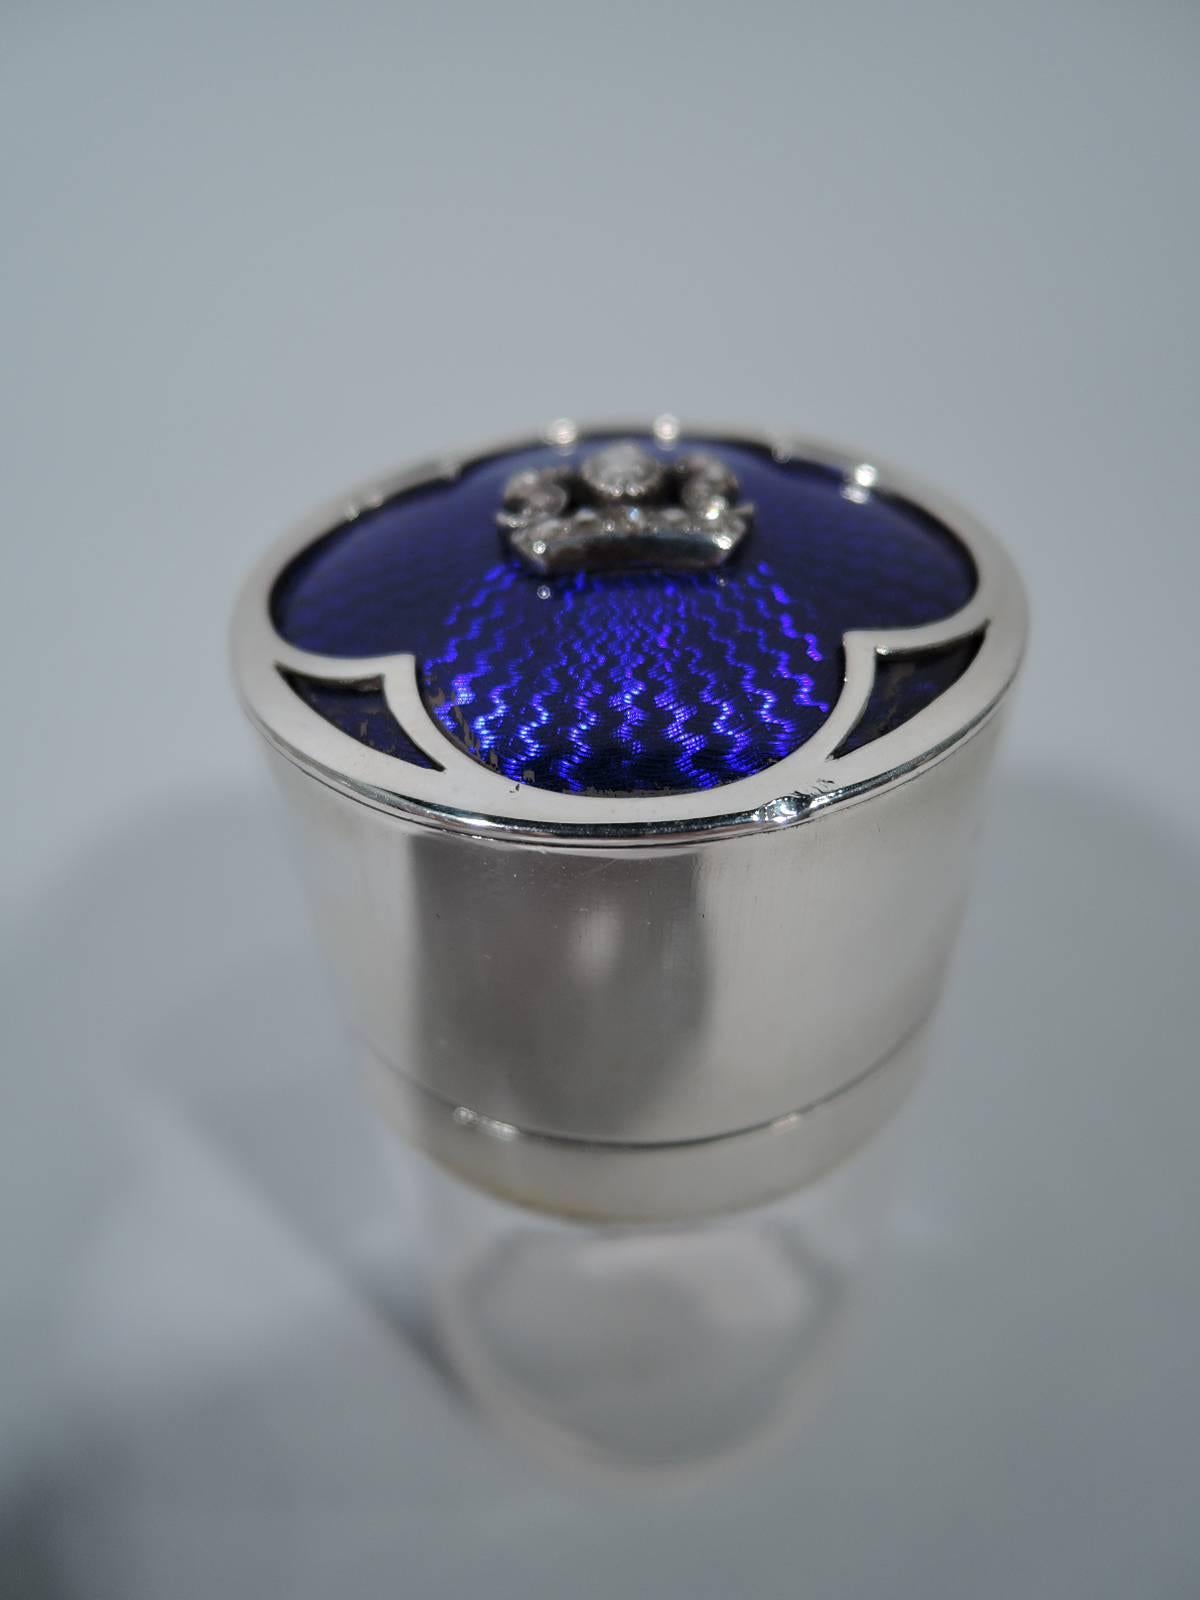 Edwardian clear glass vanity jar and sterling silver and enamel jar decorated with diamonds. Made in London in 1902. Cylindrical with silver collar and hinged cover. Cover top has radiating cobalt guilloche enamel overlaid with silver quatrefoil and